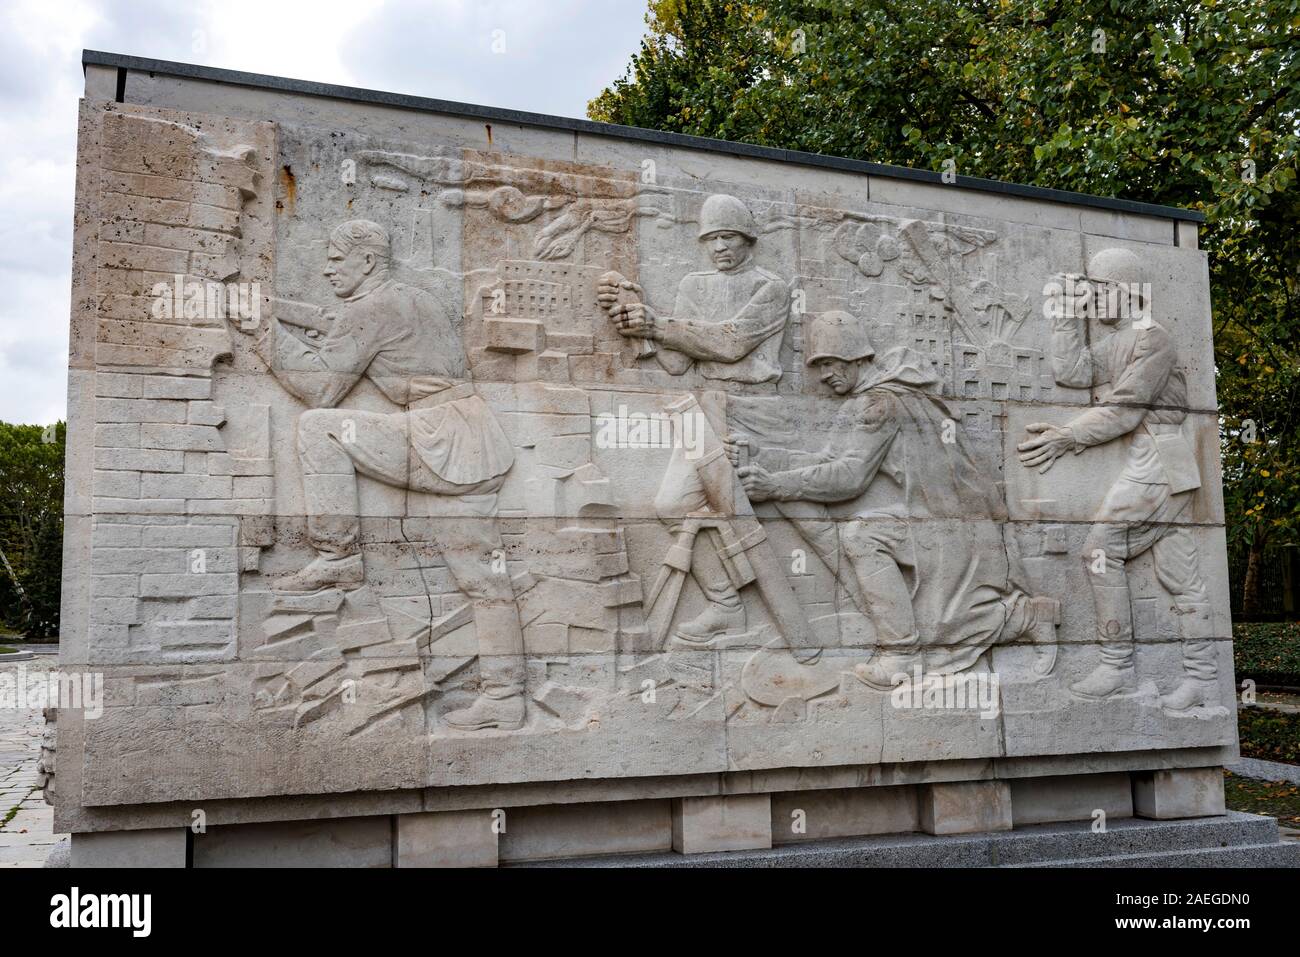 The Soviet War Memorial and cemetery in Treptower Park, East Berlin, Germany Stock Photo